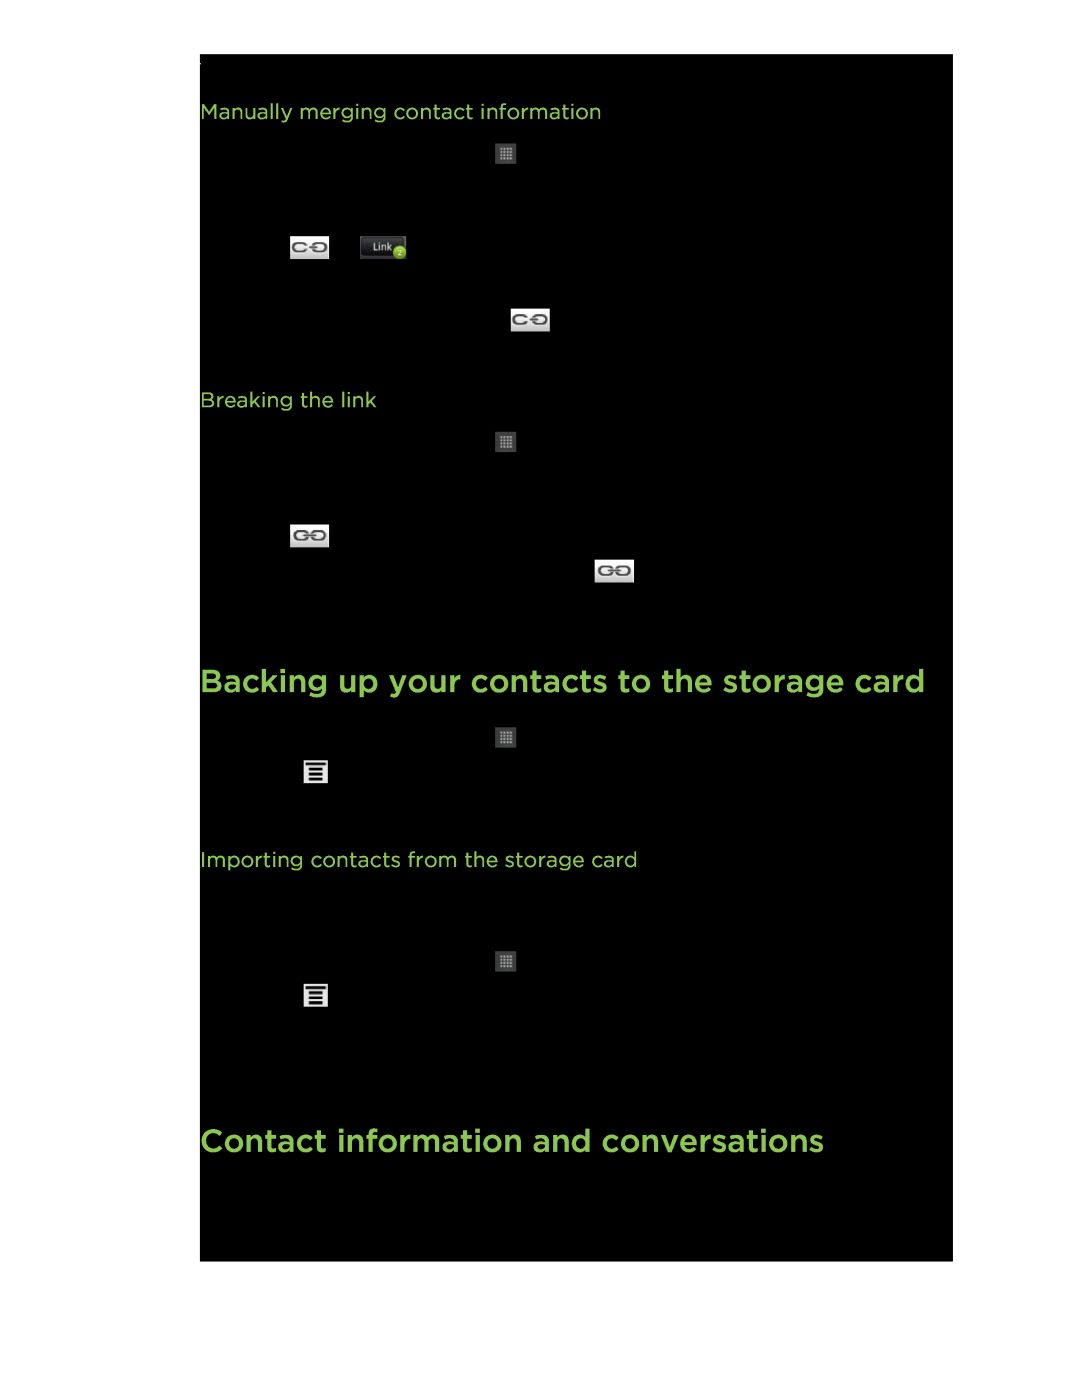 HTC HTCFlyerP512 Backing up your contacts to the storage card, Contact information and conversations, Breaking the link 